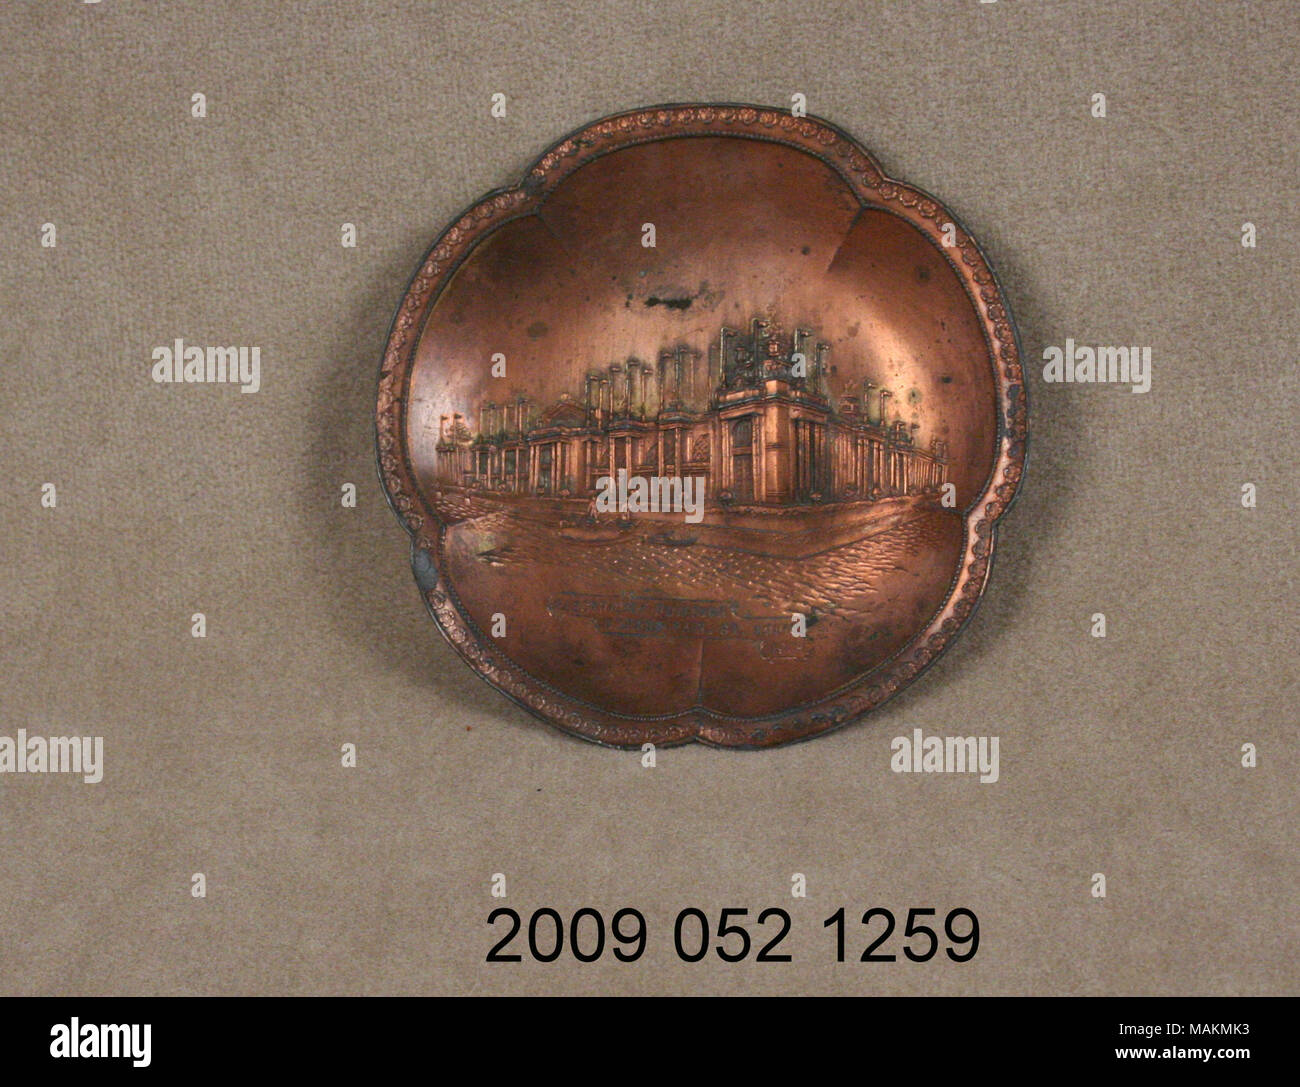 Copper colored metal pin tray has scalloped edge and raised image of the Palace of Electricity from the 1904 World's Fair. Title: Metal Pin Tray With Raised Image of the Palace of Electricity  . 1904. Stock Photo